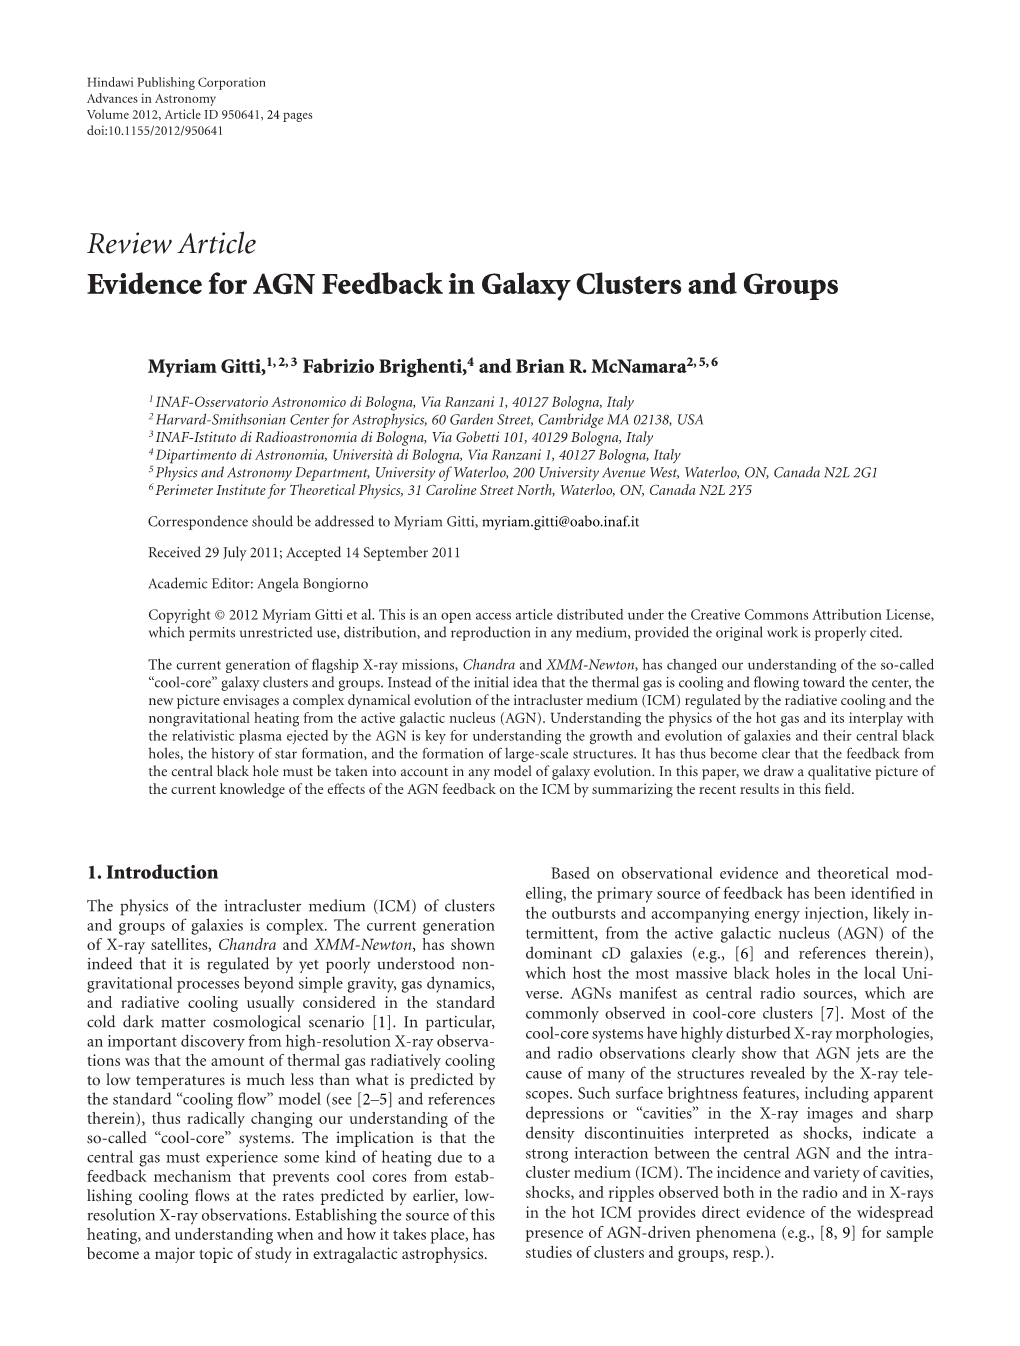 Evidence for AGN Feedback in Galaxy Clusters and Groups